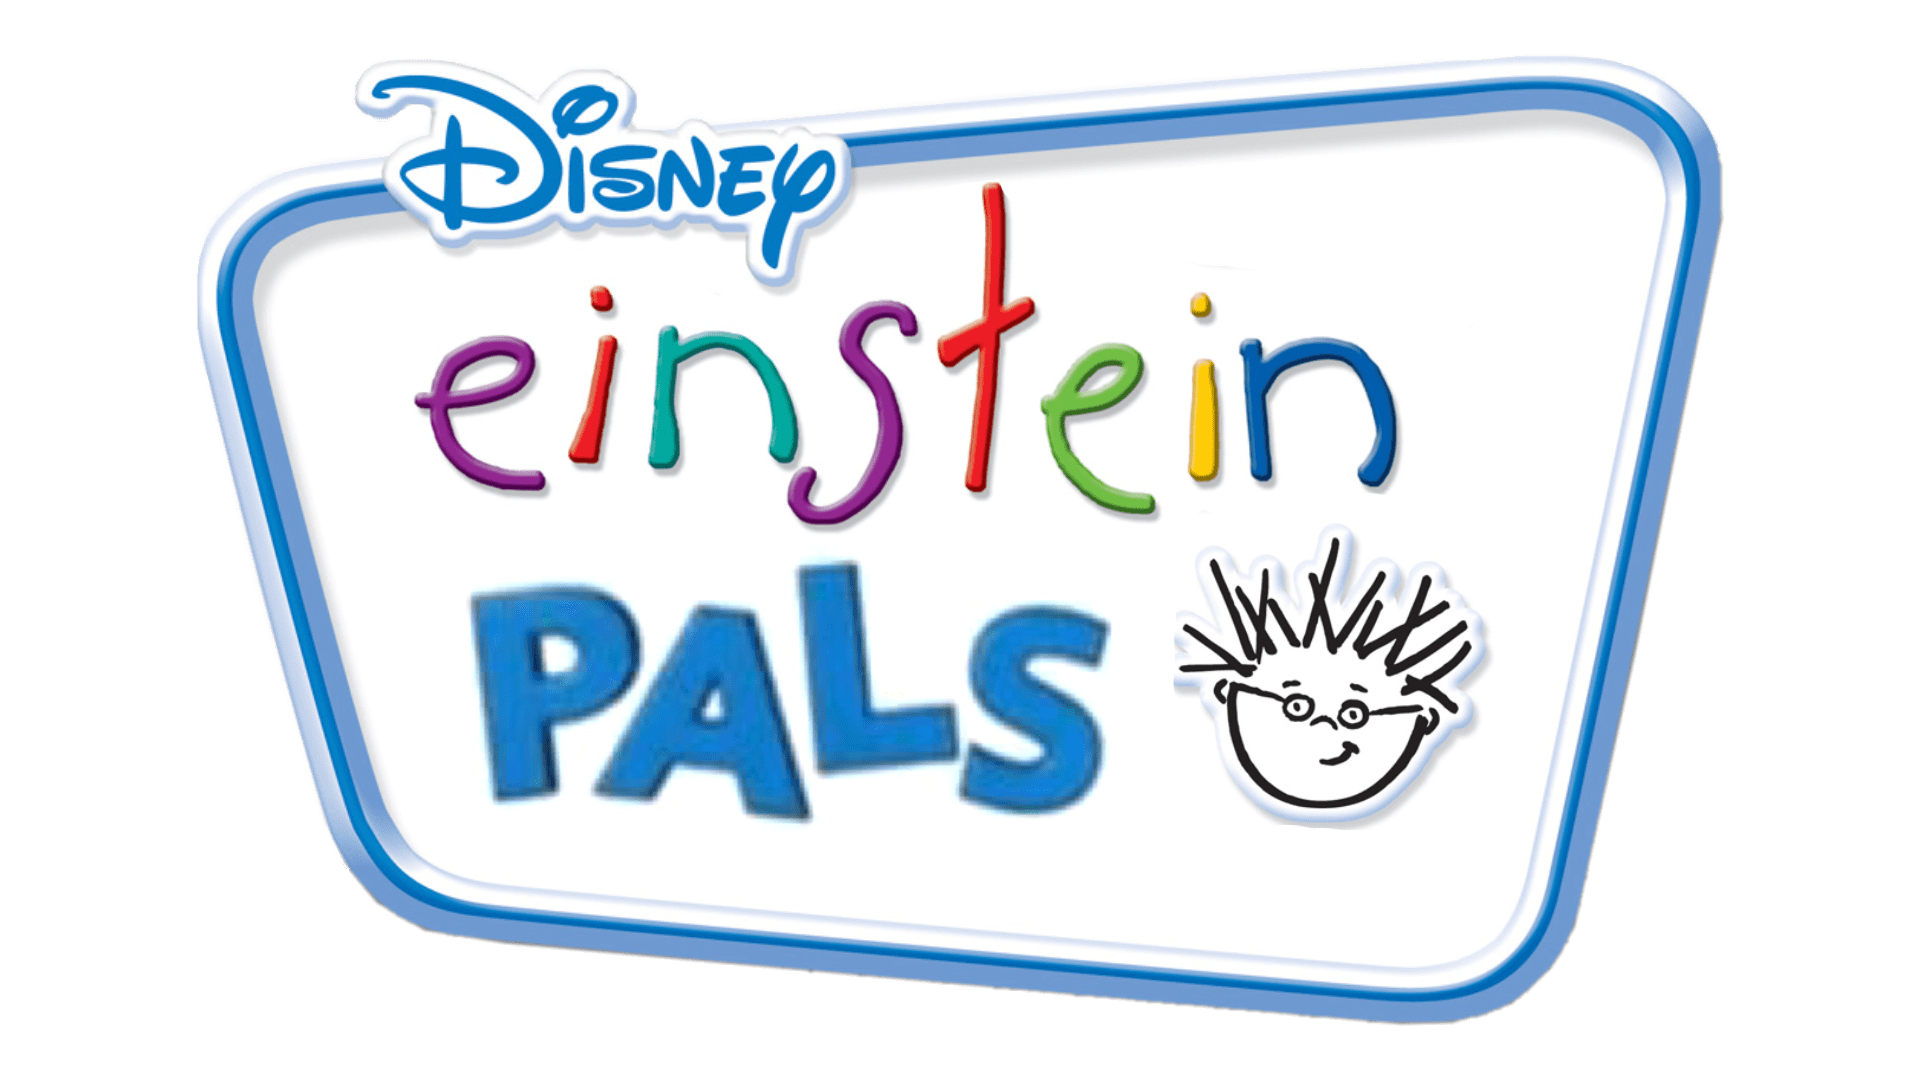 Baby Einstein Logo And Symbol Meaning History Png